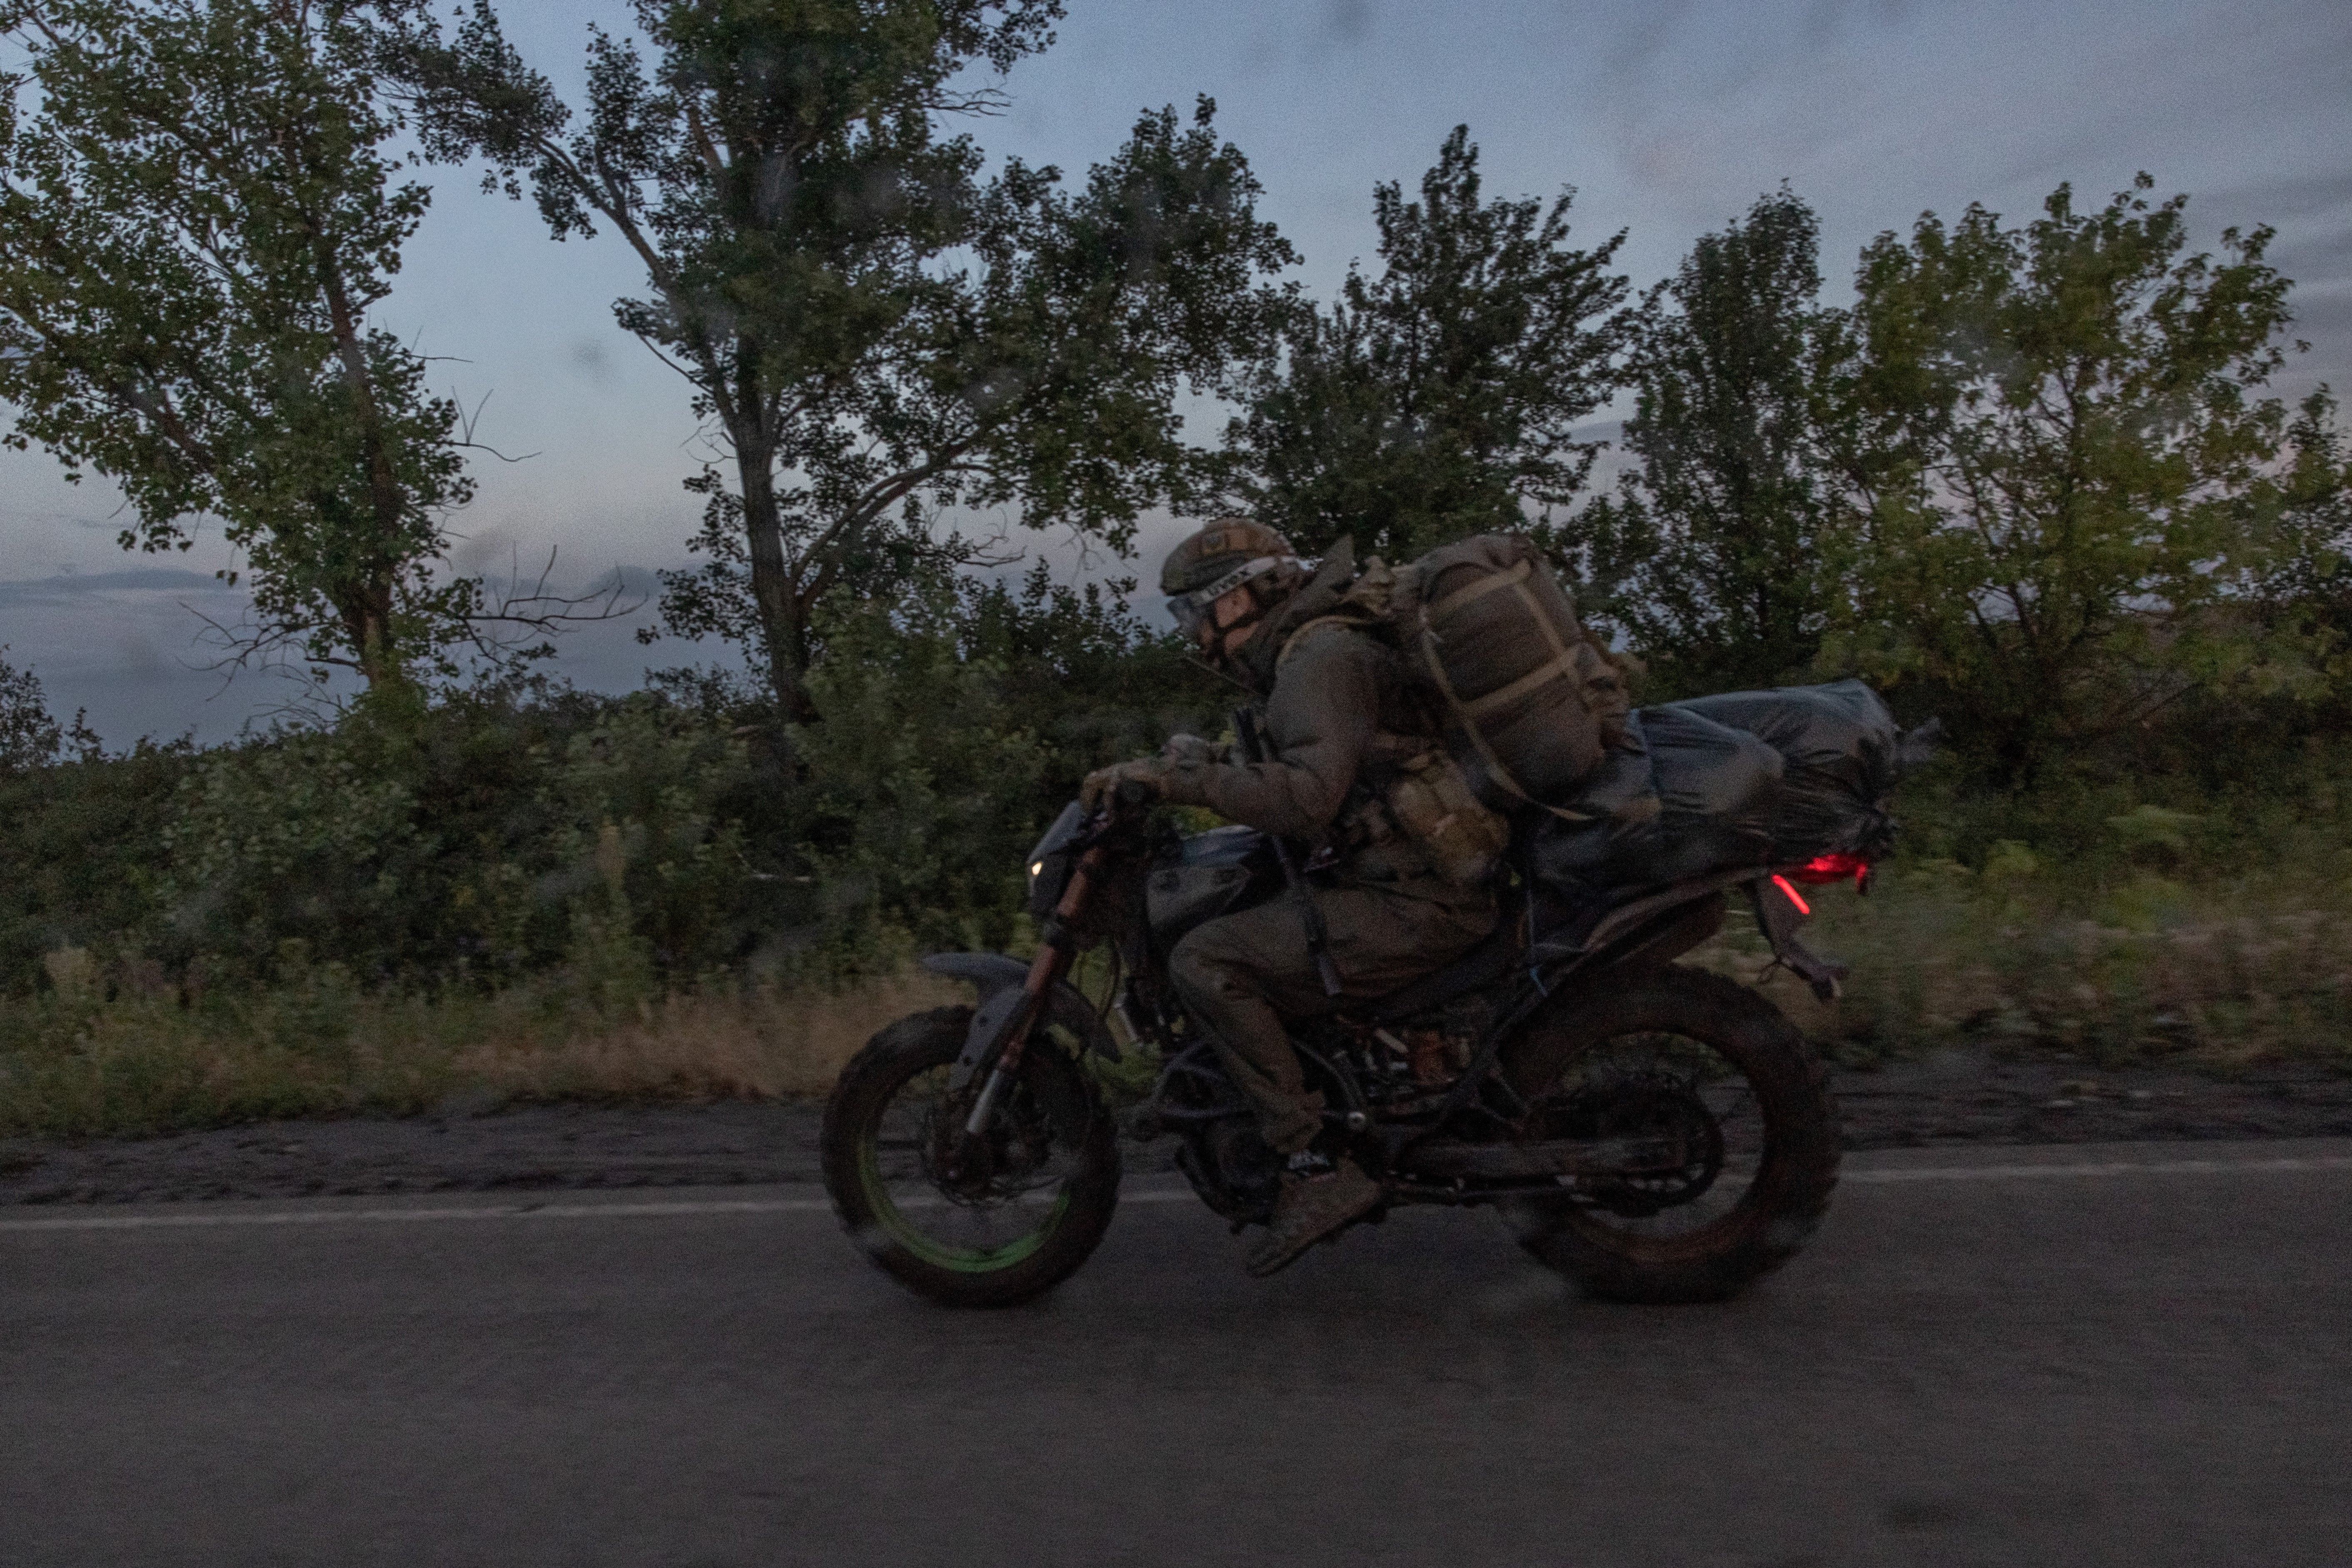 A Ukrainian serviceman rides a motorcycle on a road in the Donetsk region